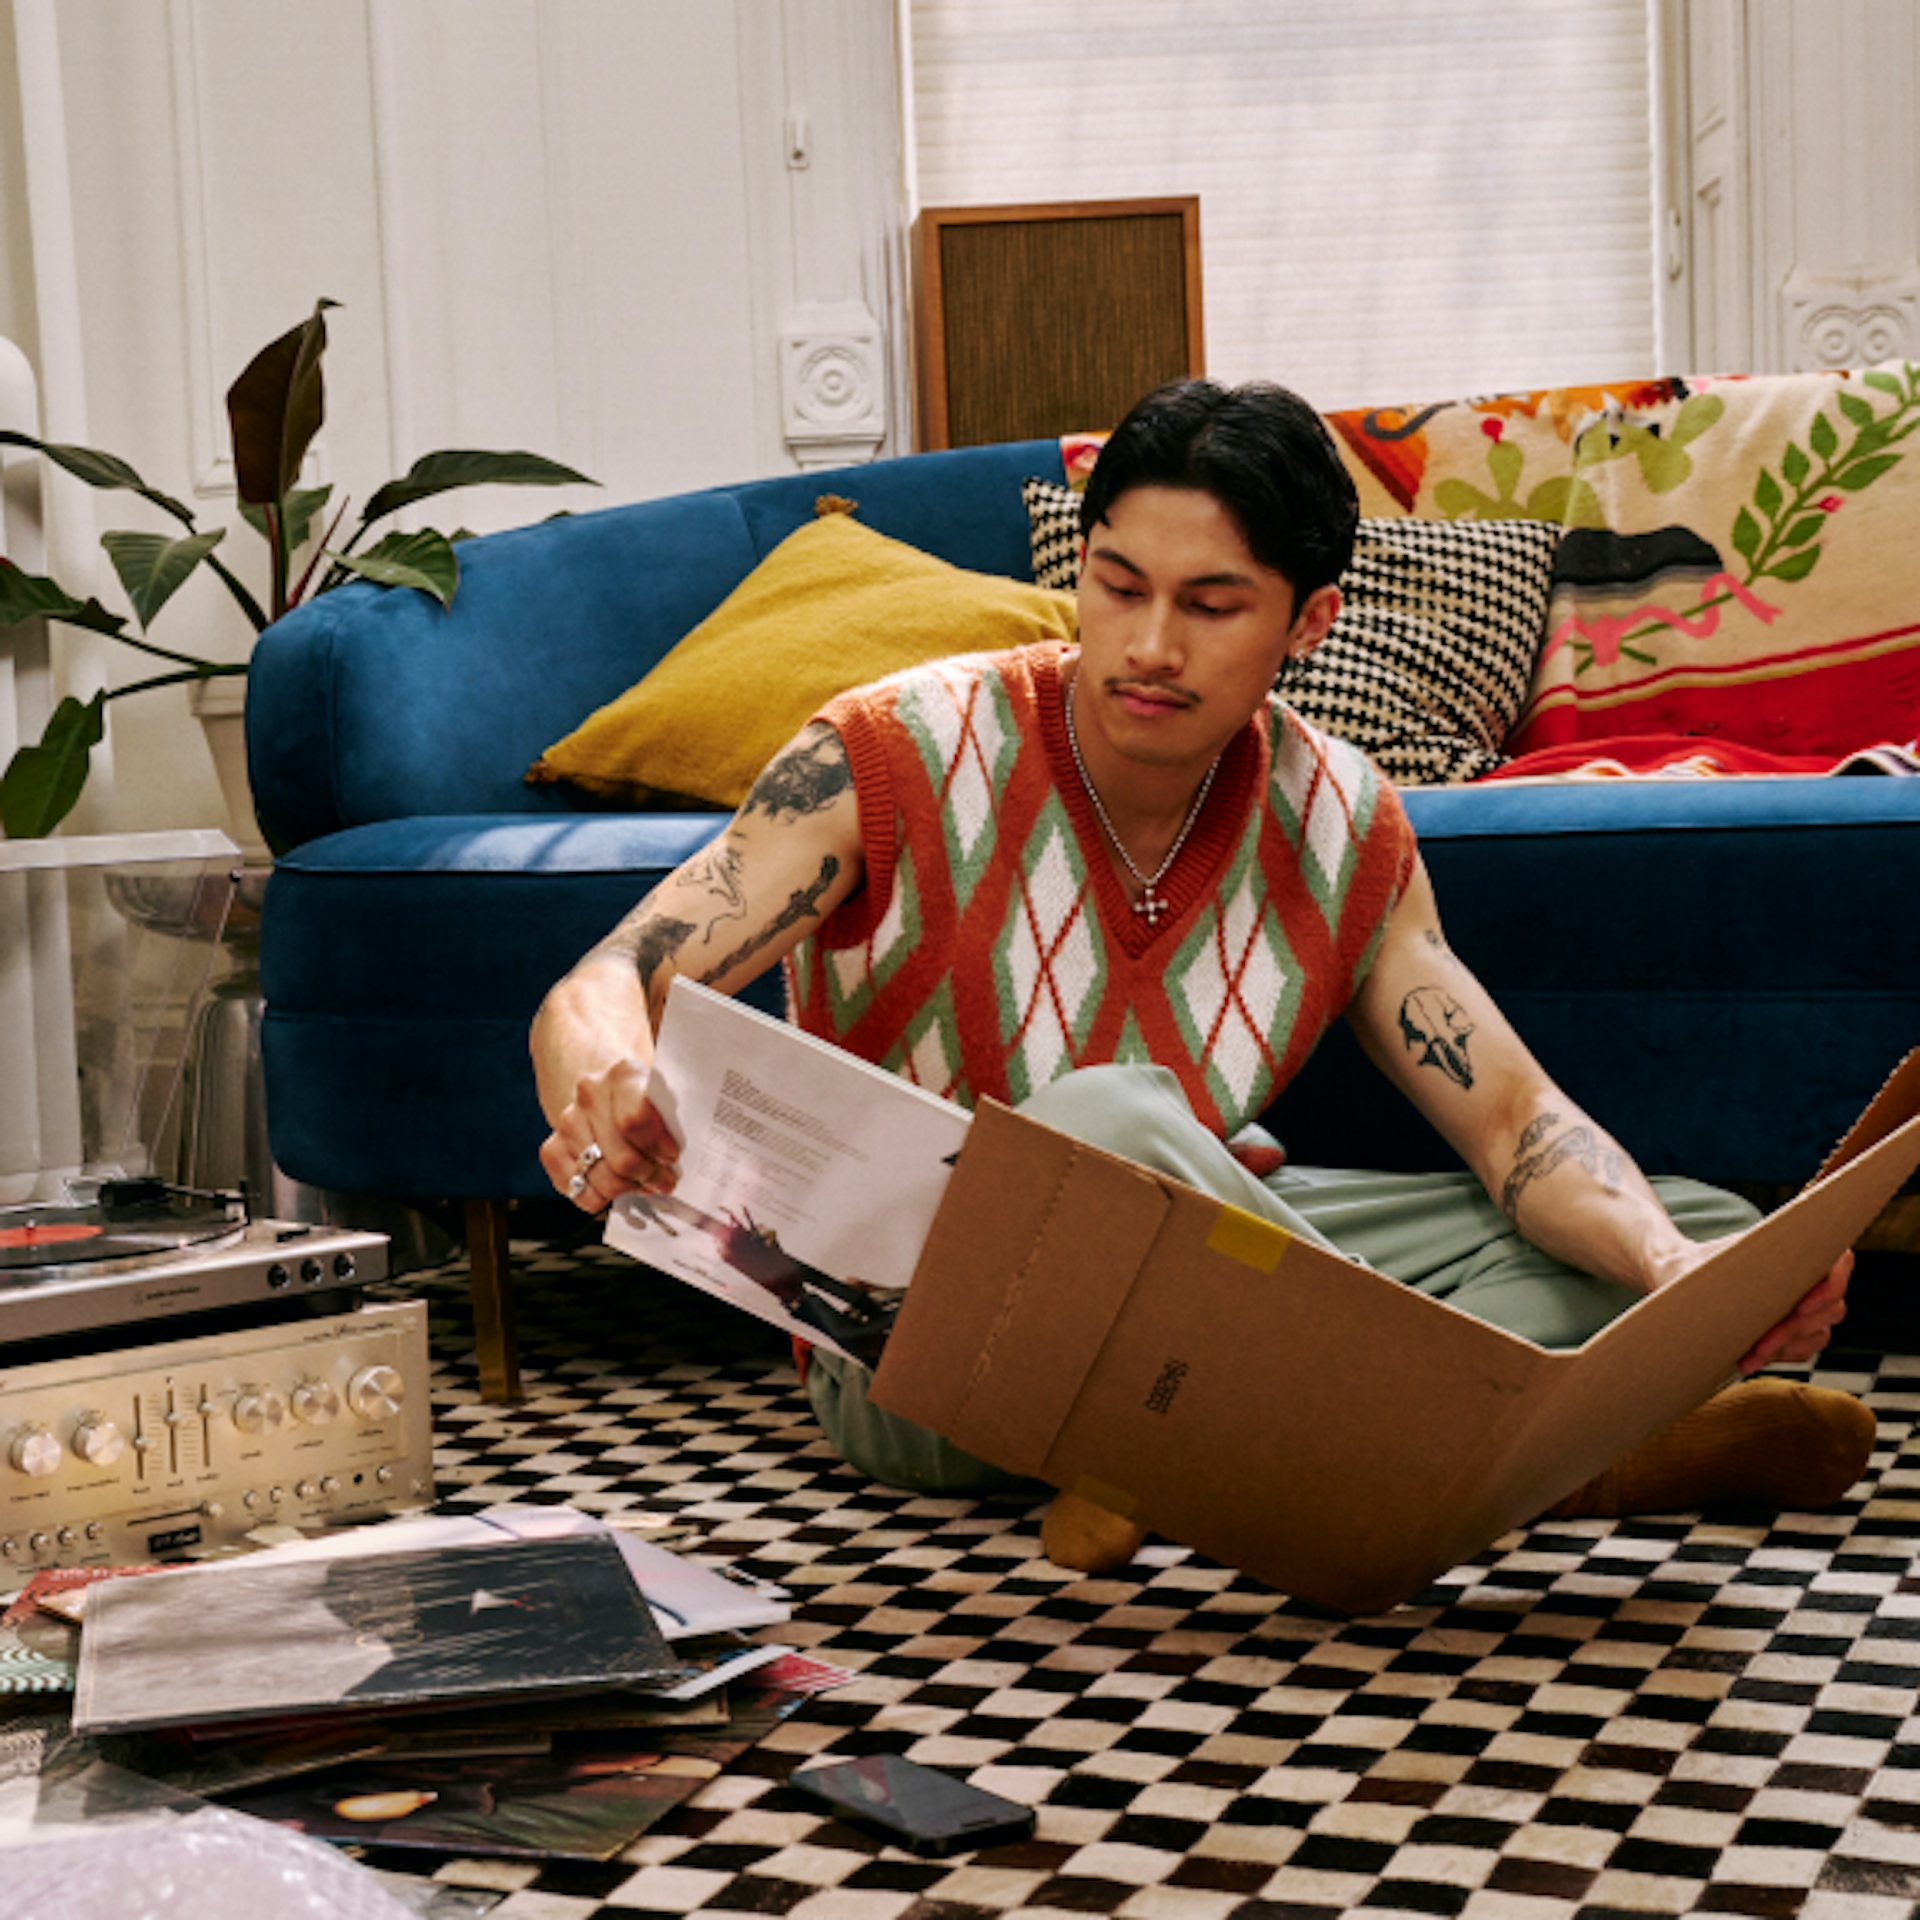 A person is sitting on the floor of a cozy living room, looking through vinyl records. They are wearing a colorful argyle vest and green pants, with a blue couch, patterned pillows, and plants in the background. The scene has a vintage and relaxed vibe.